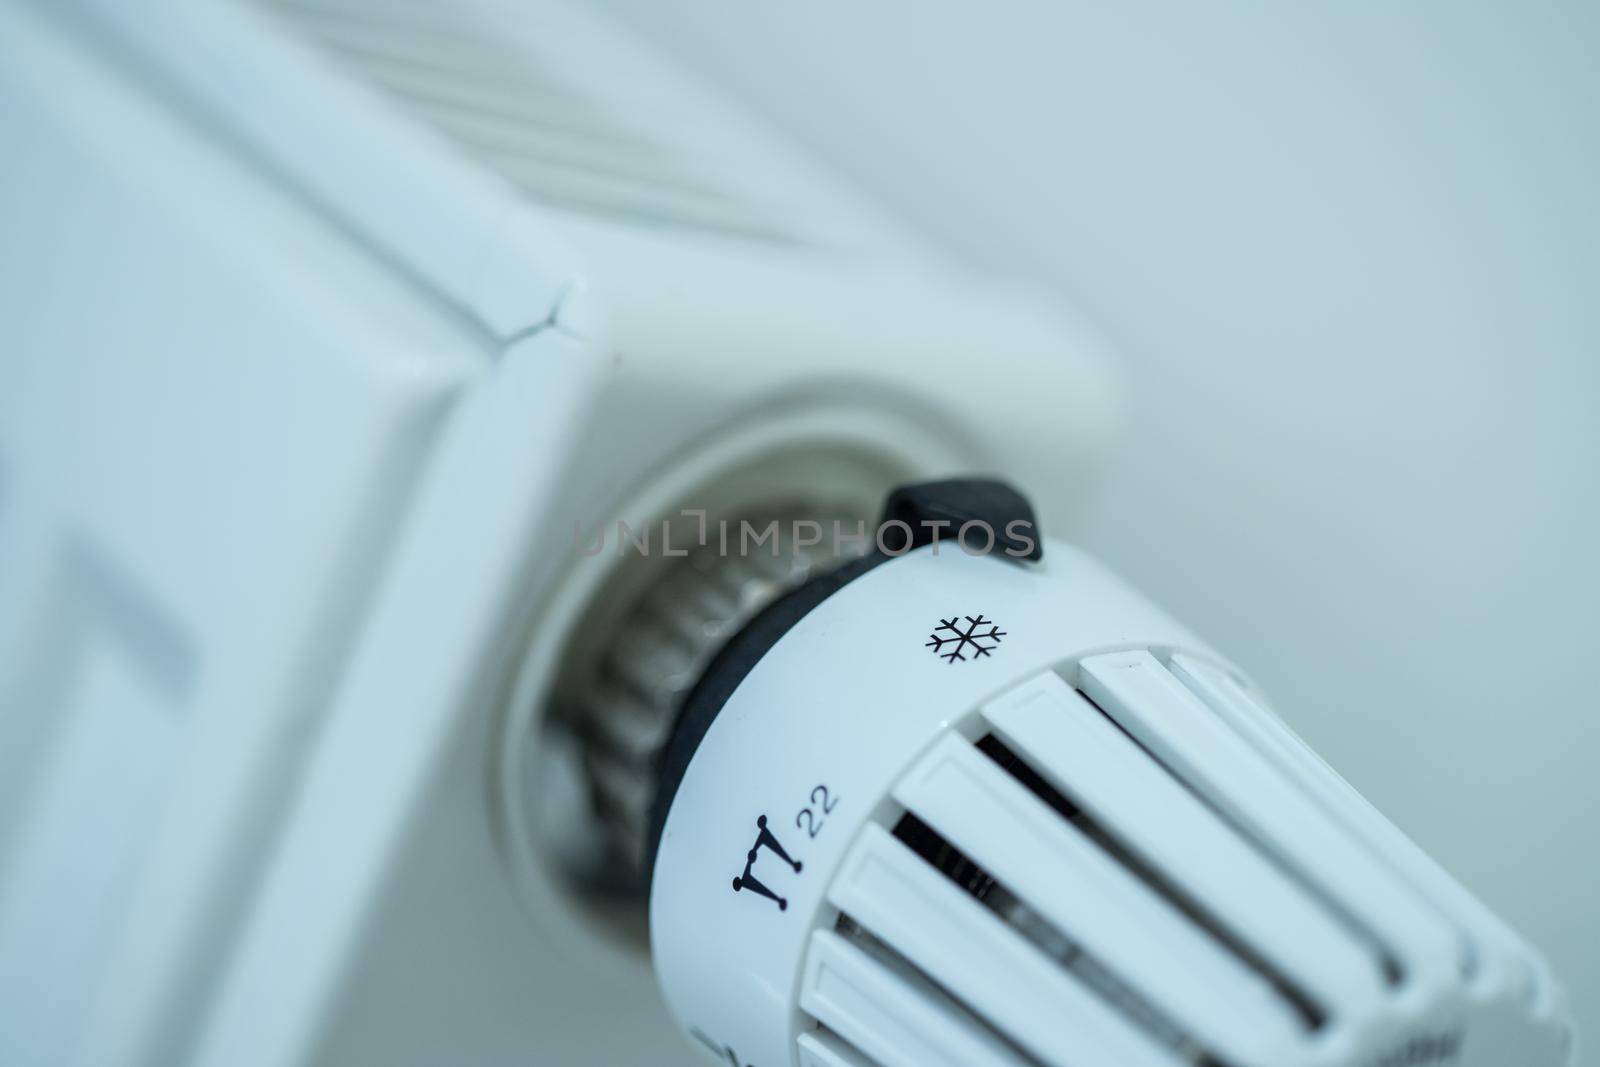 Heat regulator on a heater, close up picture. Heating Costs. by Daxenbichler